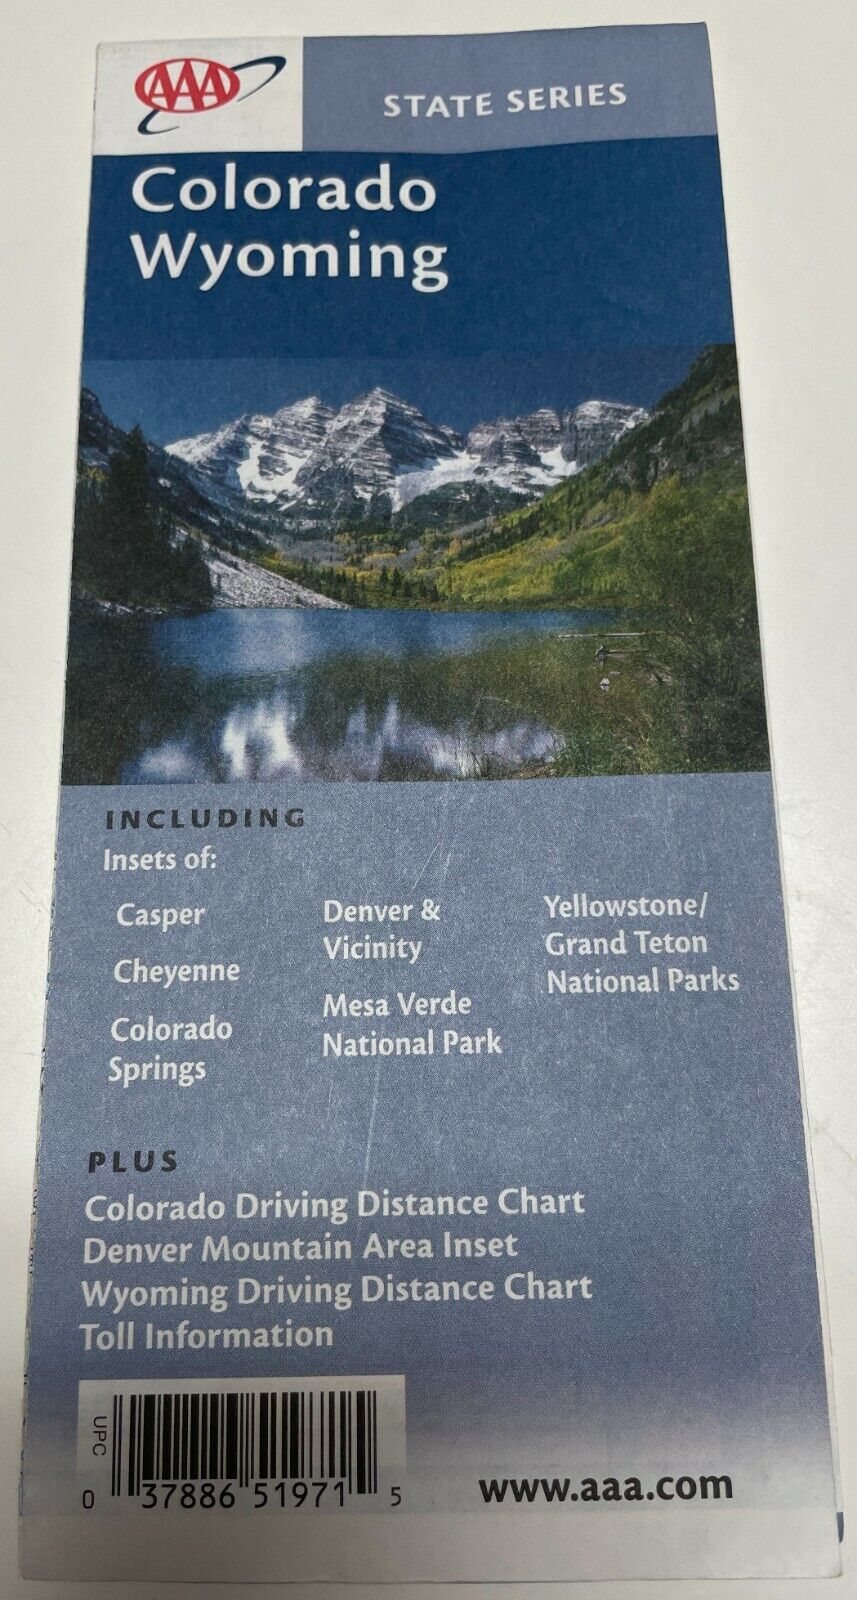 Colorado Wyoming AAA Map State Series White River National Forest Colorado '04 